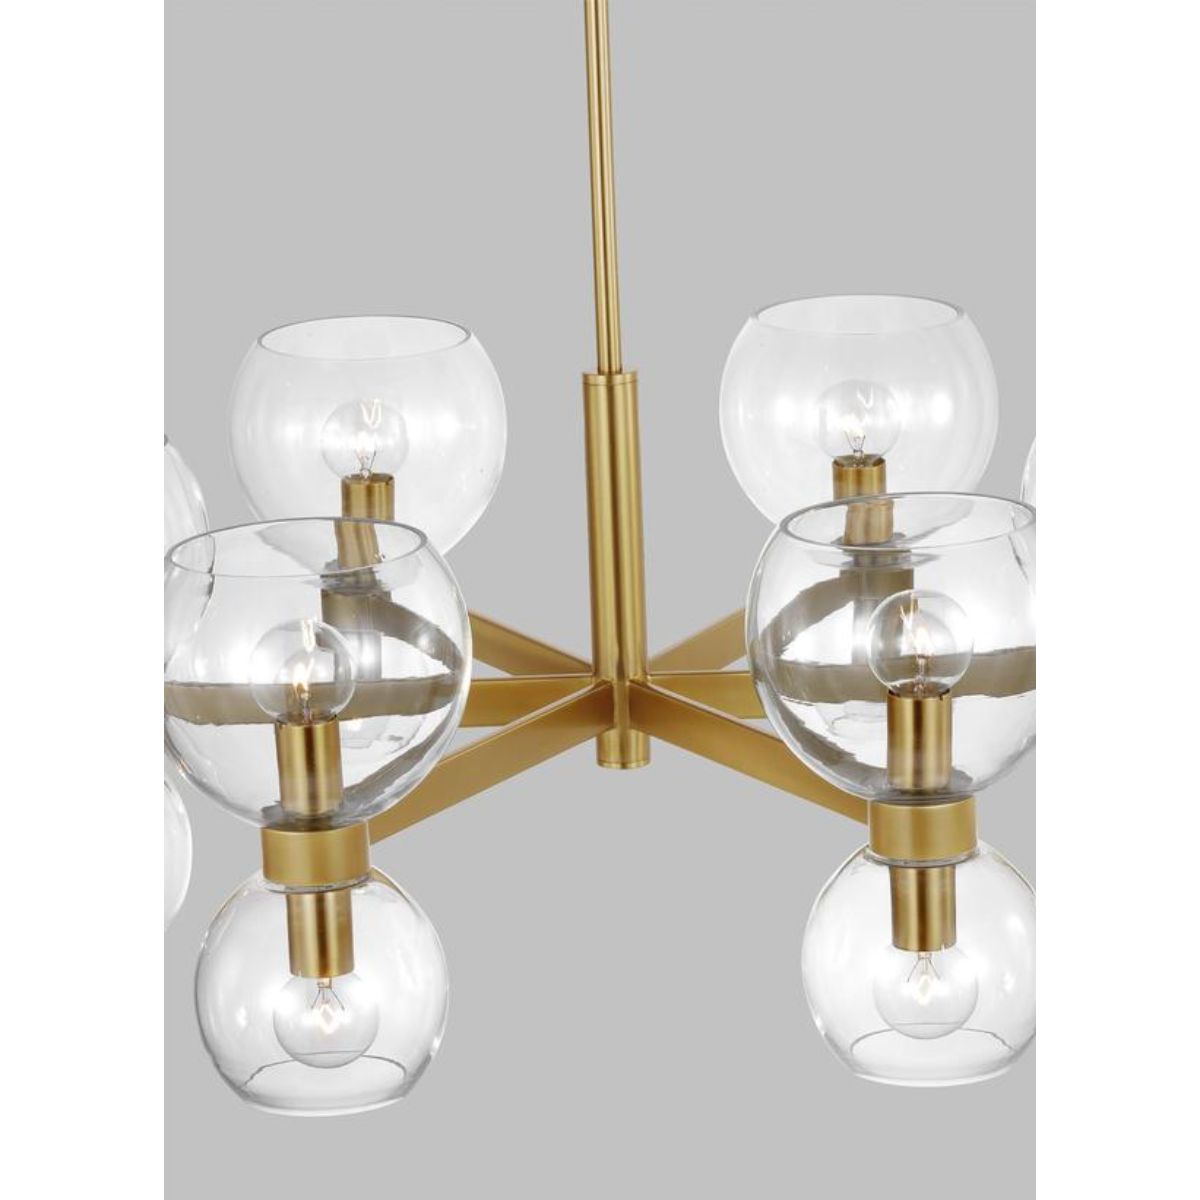 Londyn 28 in. 12 Lights Chandelier Brushed Brass finish Clear Shade